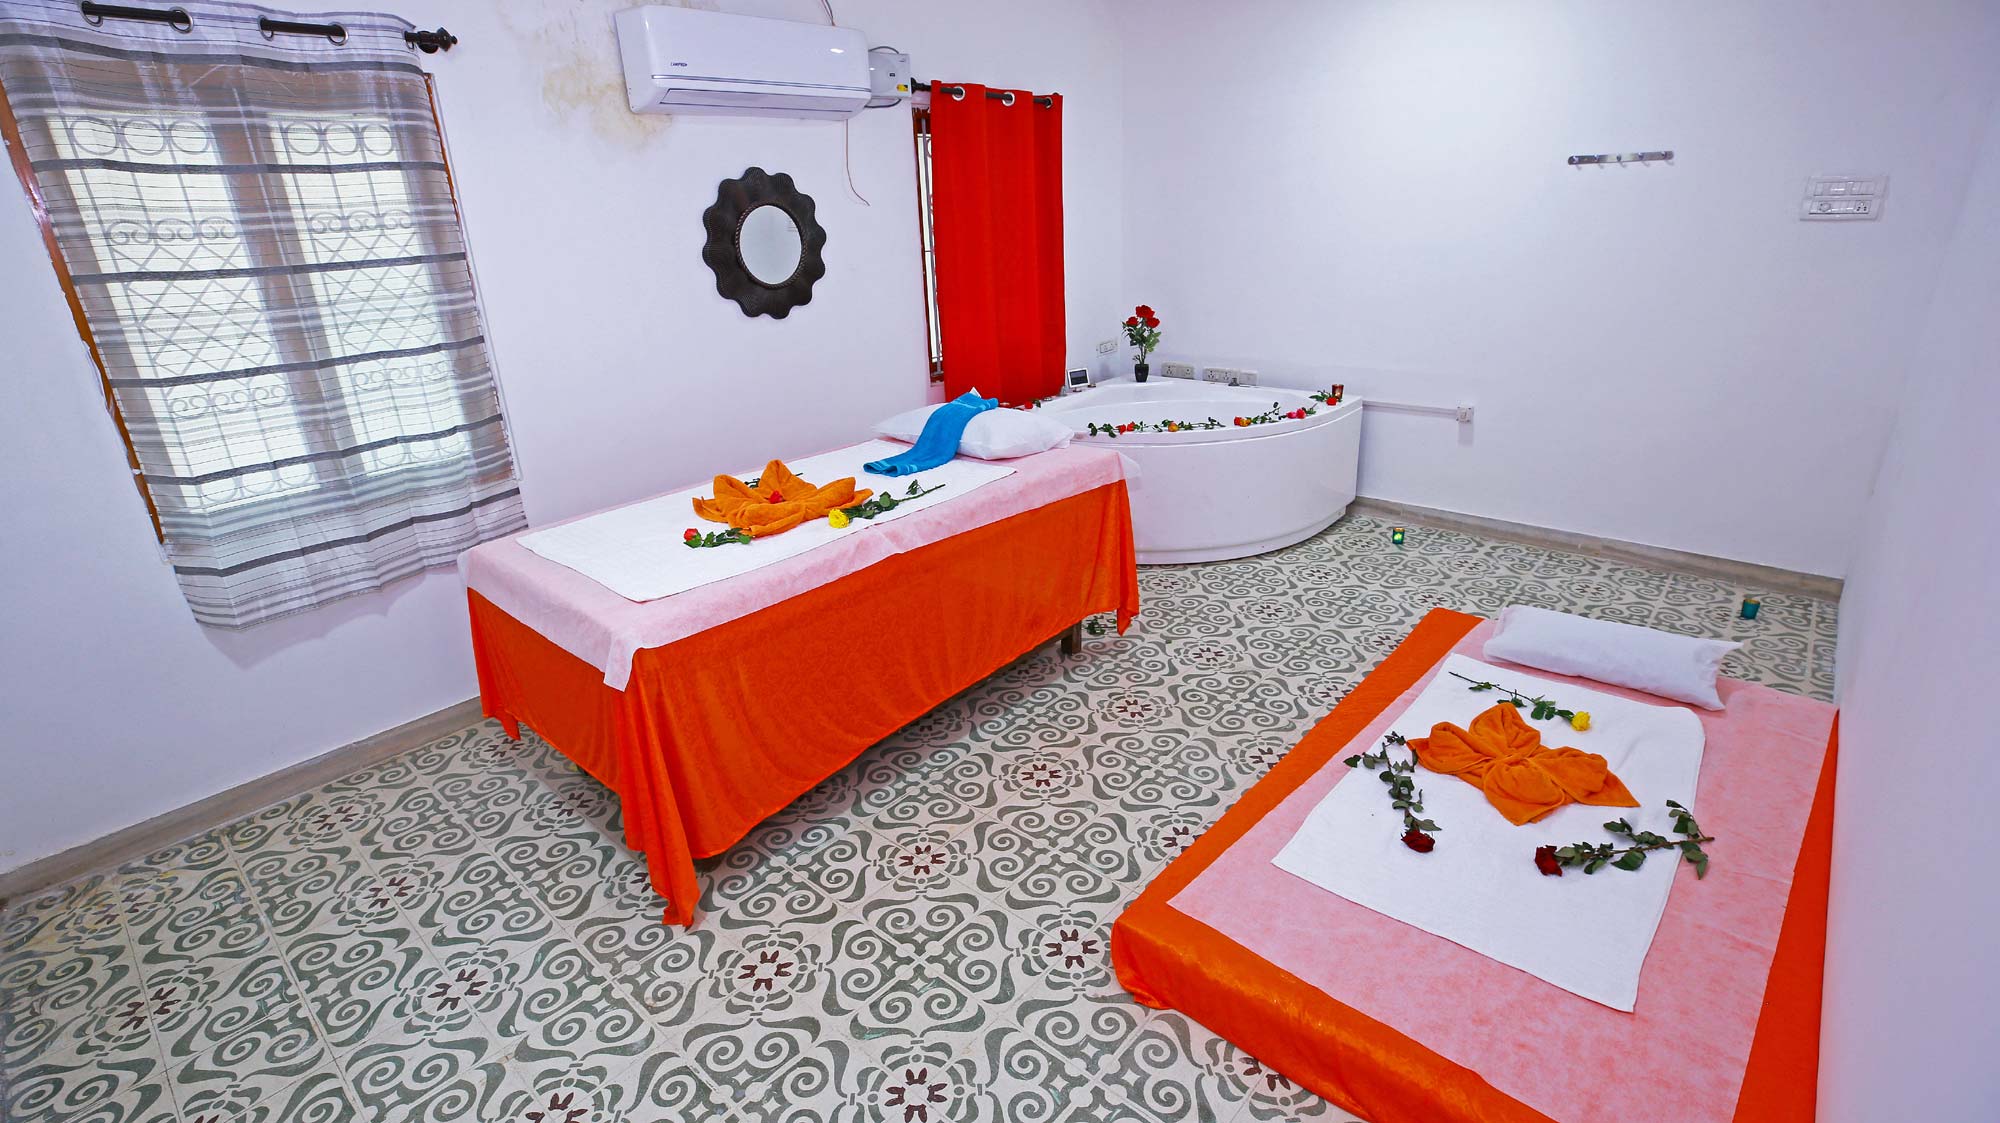 A room in a massage spa features a bathtub, massage table with pillow, towel and flowers laid on, bed with towel & flowers laid on, Air Conditioner, two windows with curtains, mirror and a hanger.